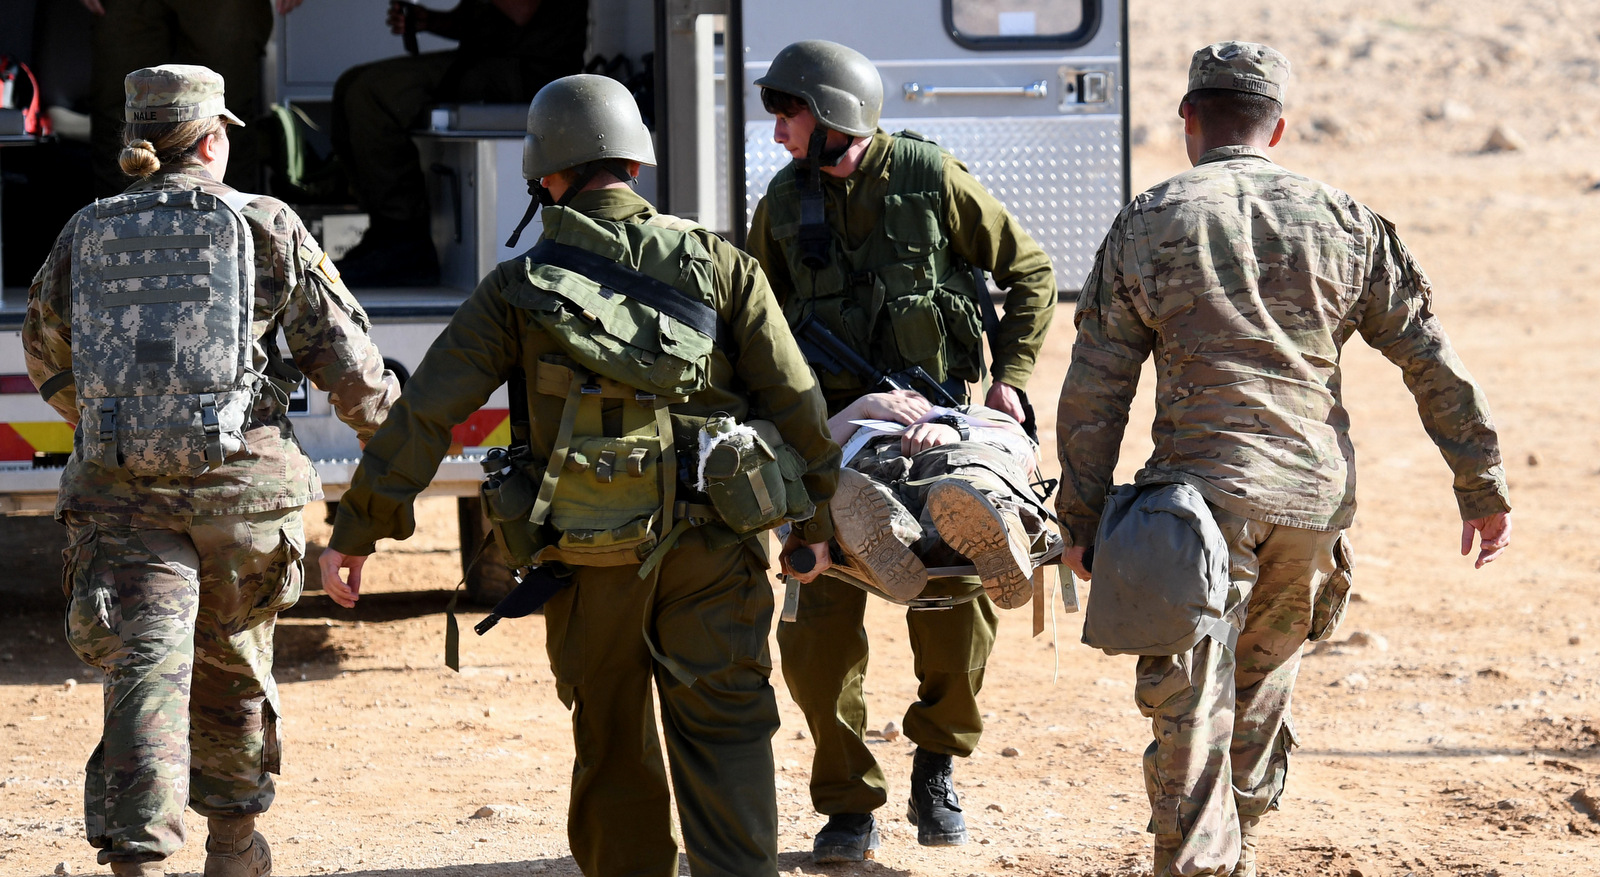 Soldiers from the U.S. Army and the Israel Defense Force (IDF carry a litter with a mock patient during a mass casualty training as part of the combined missile defense exercise known as Juniper Cobra 18, Feb. 28, 2018. (U.S. Navy photo)